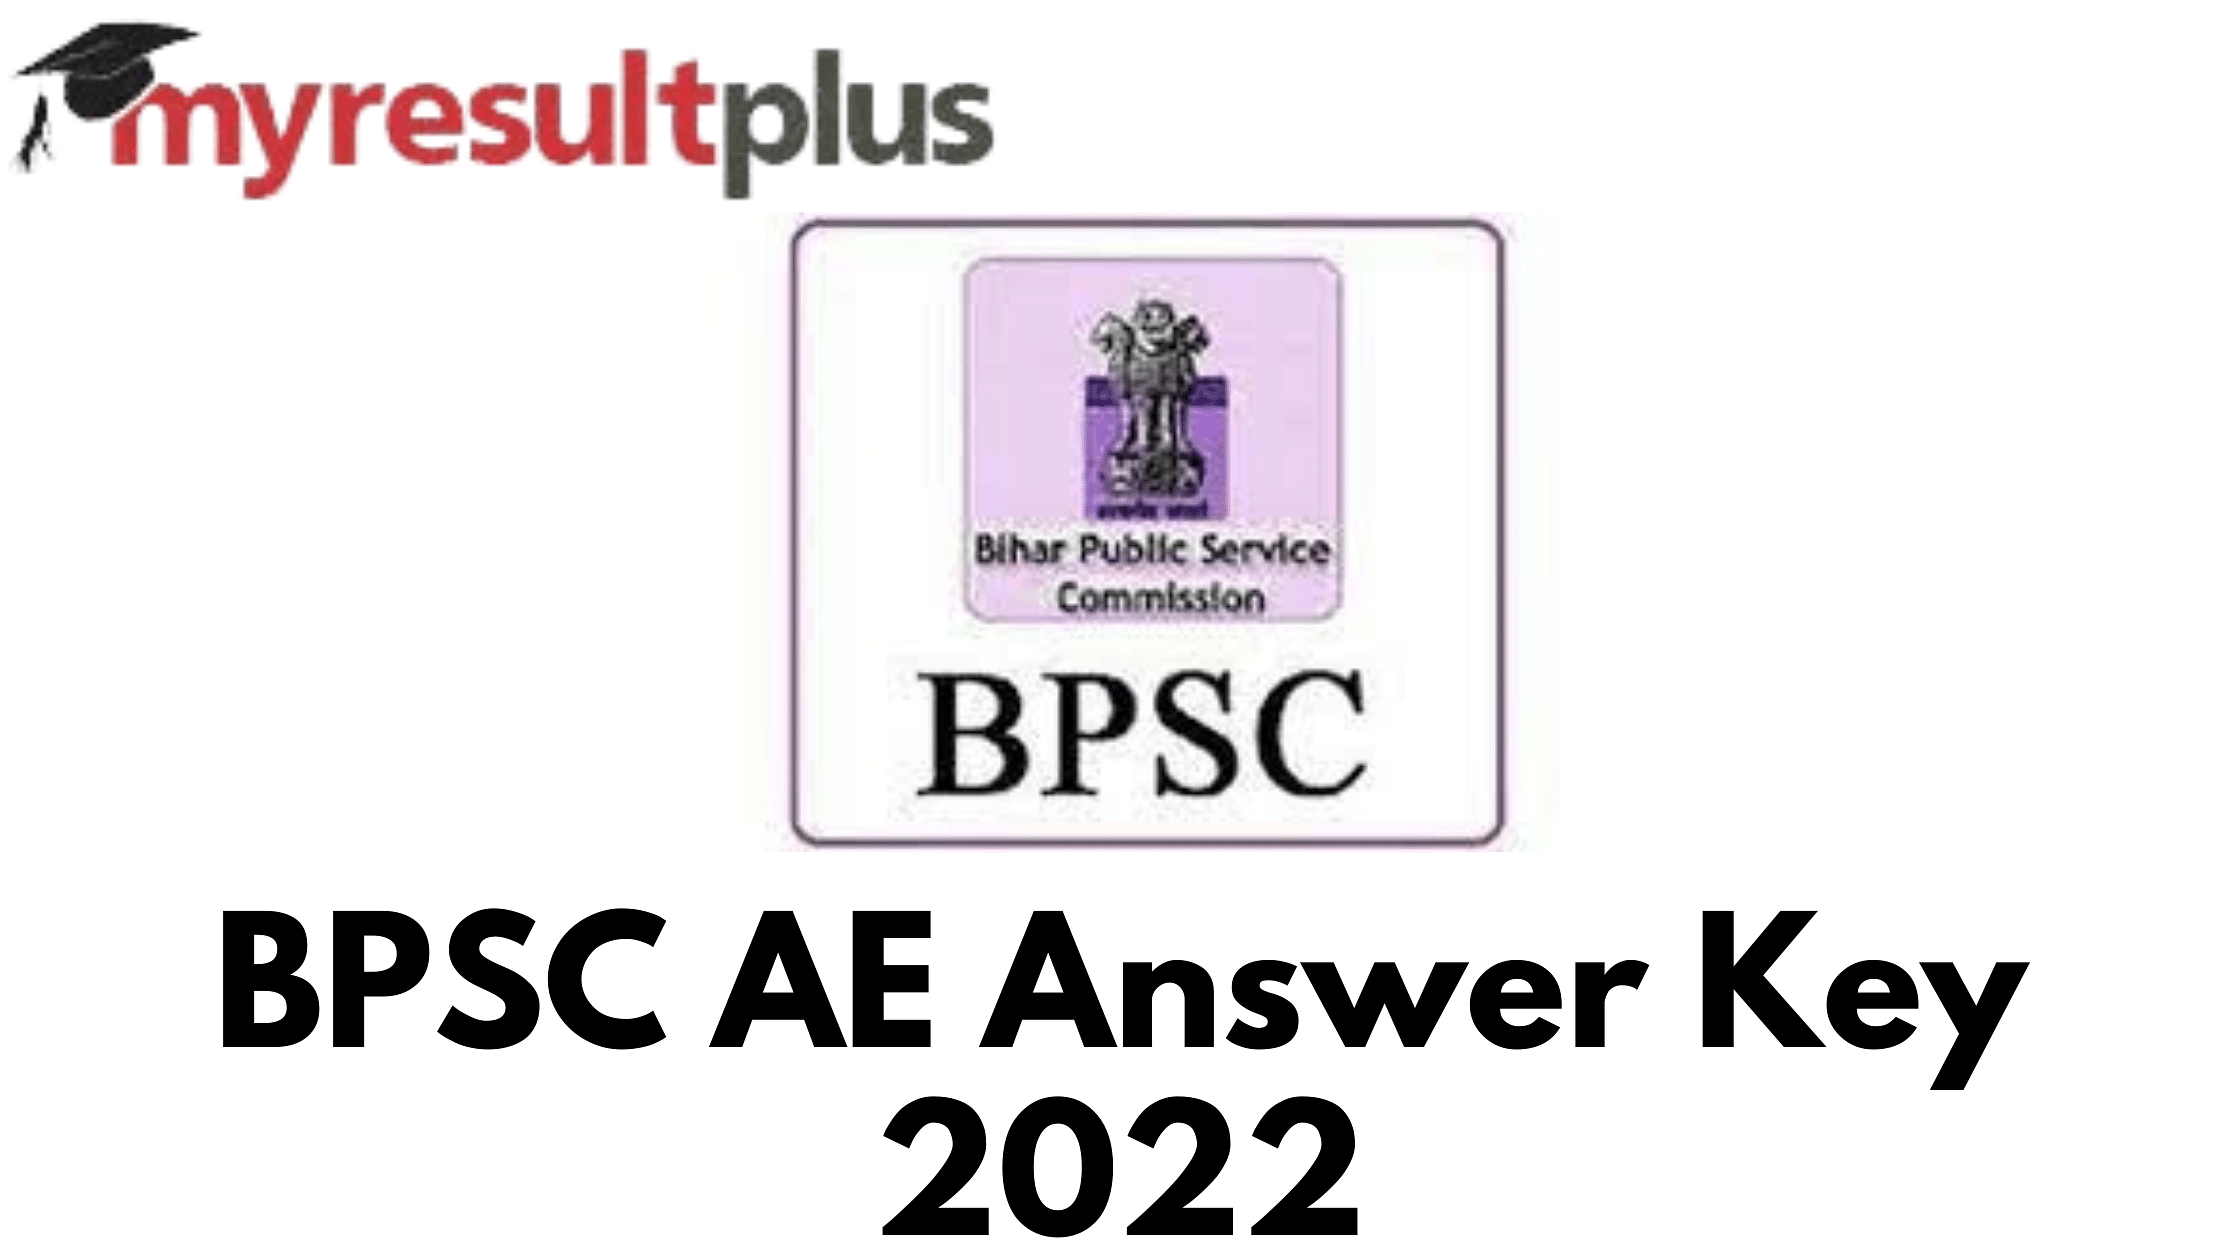 BPSC AE Answer Key 2022 Out, Know How to Download Here